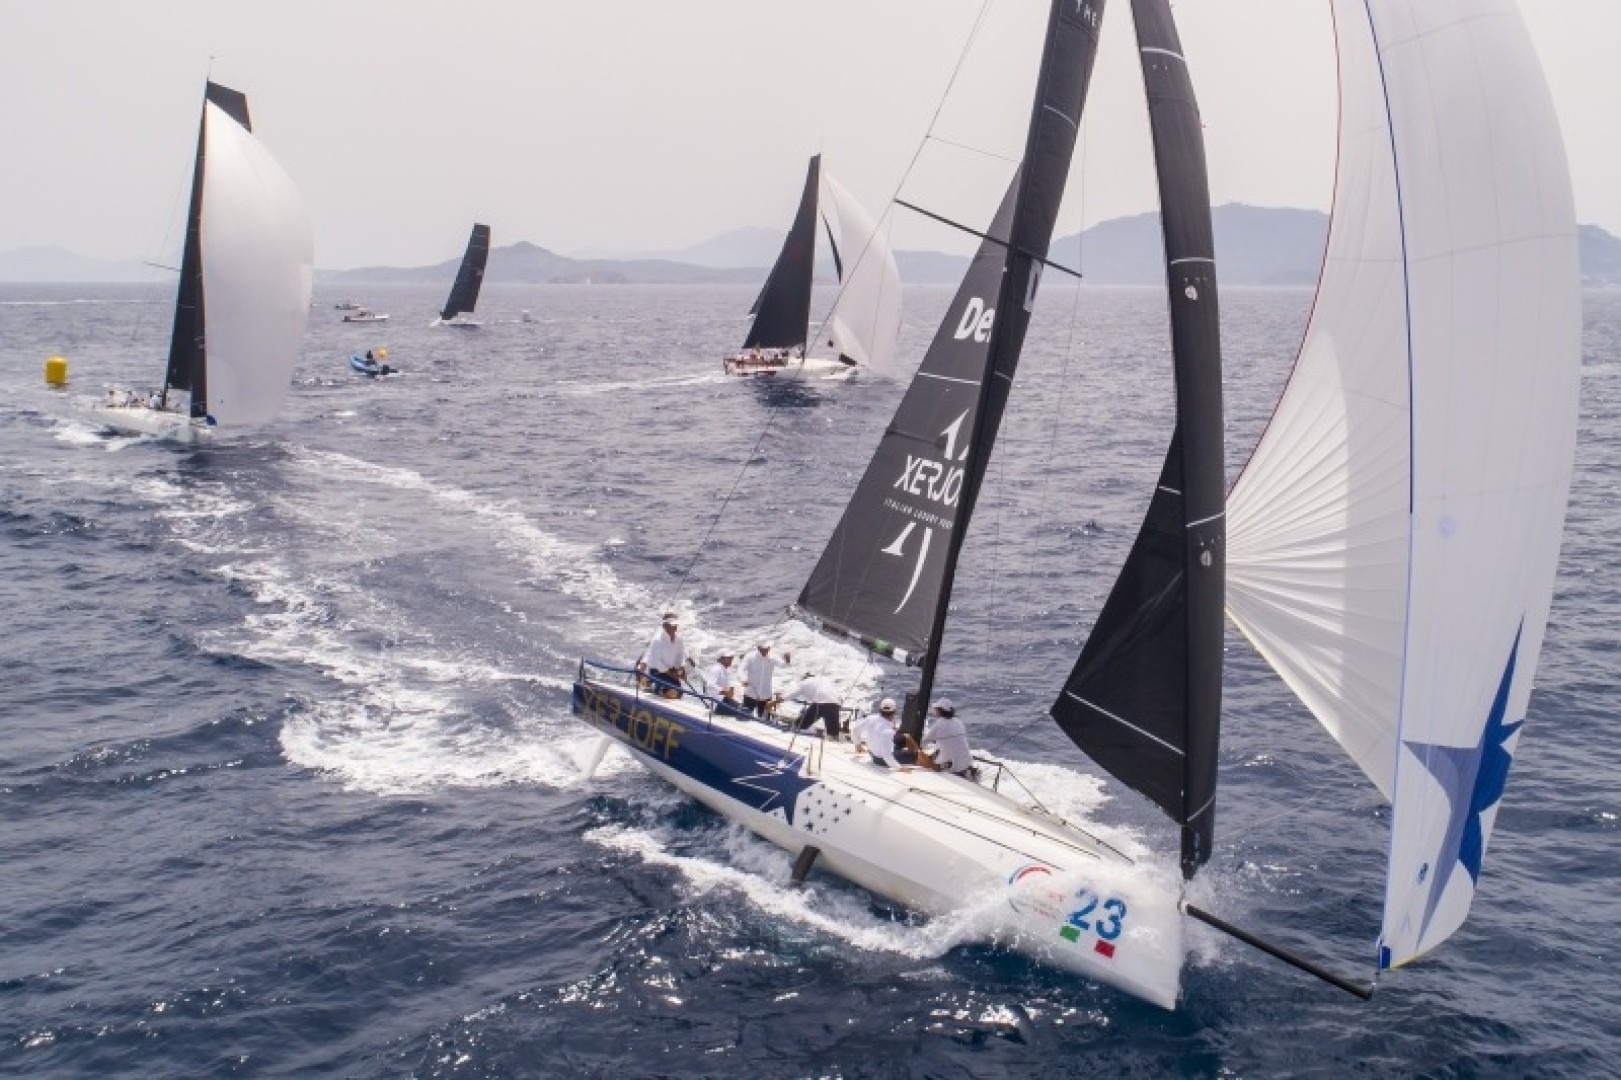 The ClubSwan 36 fleet with Fra Martina in the foreground, The Nations Trophy - Swan One Design. Photo credits: ClubSwan/Studio Borlenghi